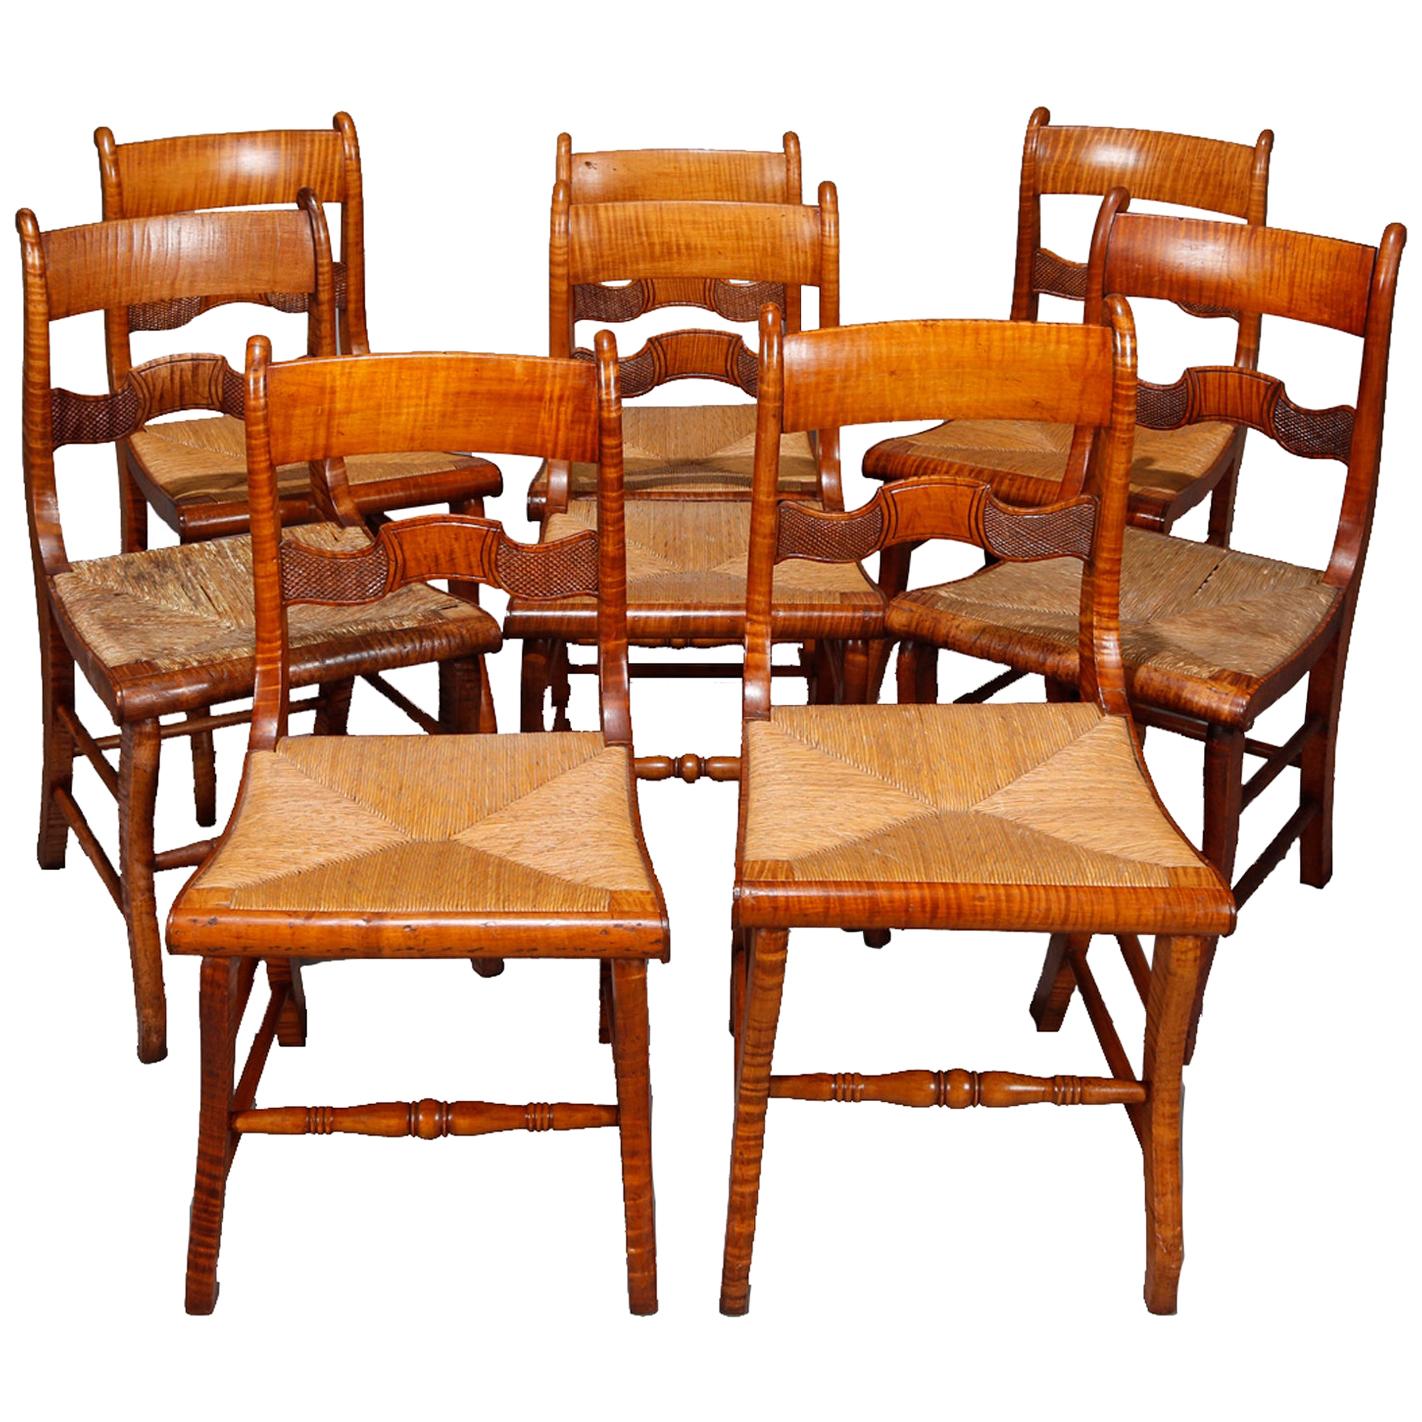 Set of Eight Antique Handmade Ladder Back and Rush Seat Tiger Maple Chairs